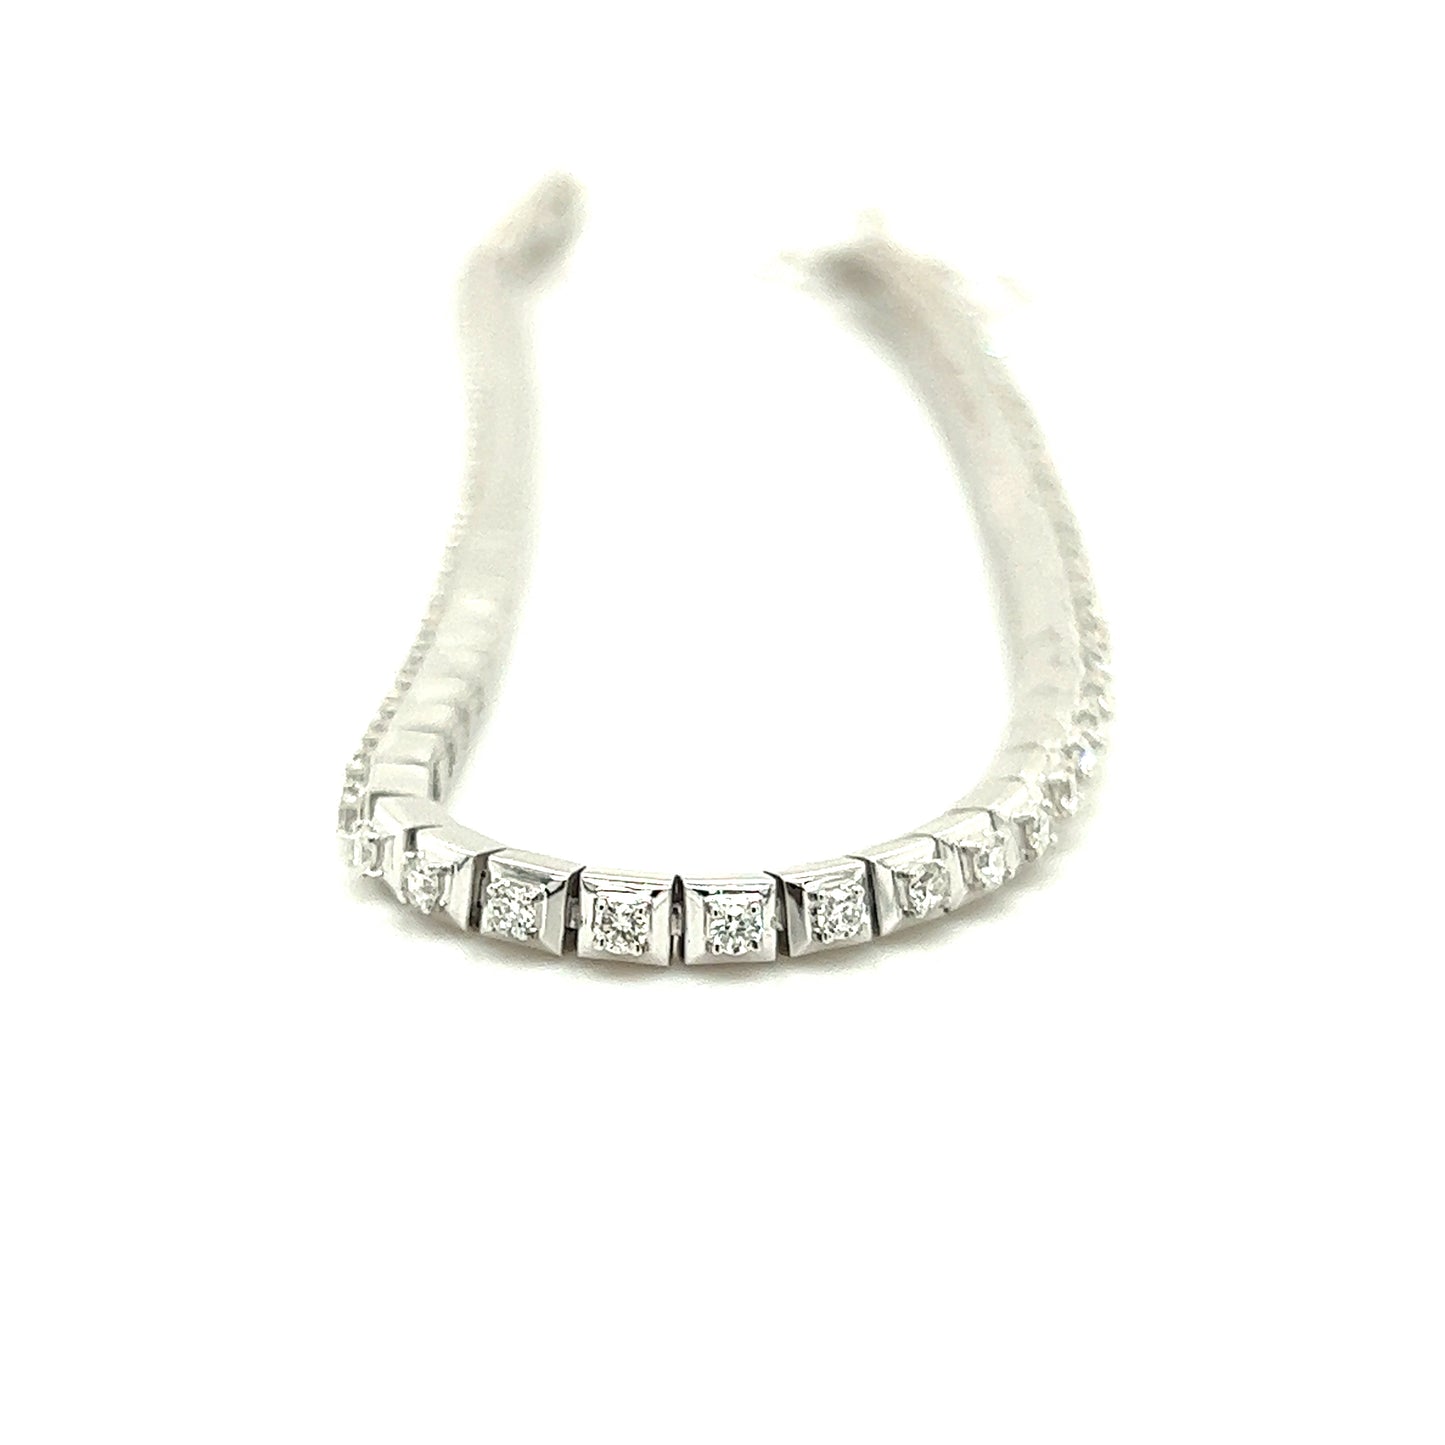 Diamond Link Bracelet with 1.0ctw of Diamonds in 14K White Gold Link and Diamonds Front View